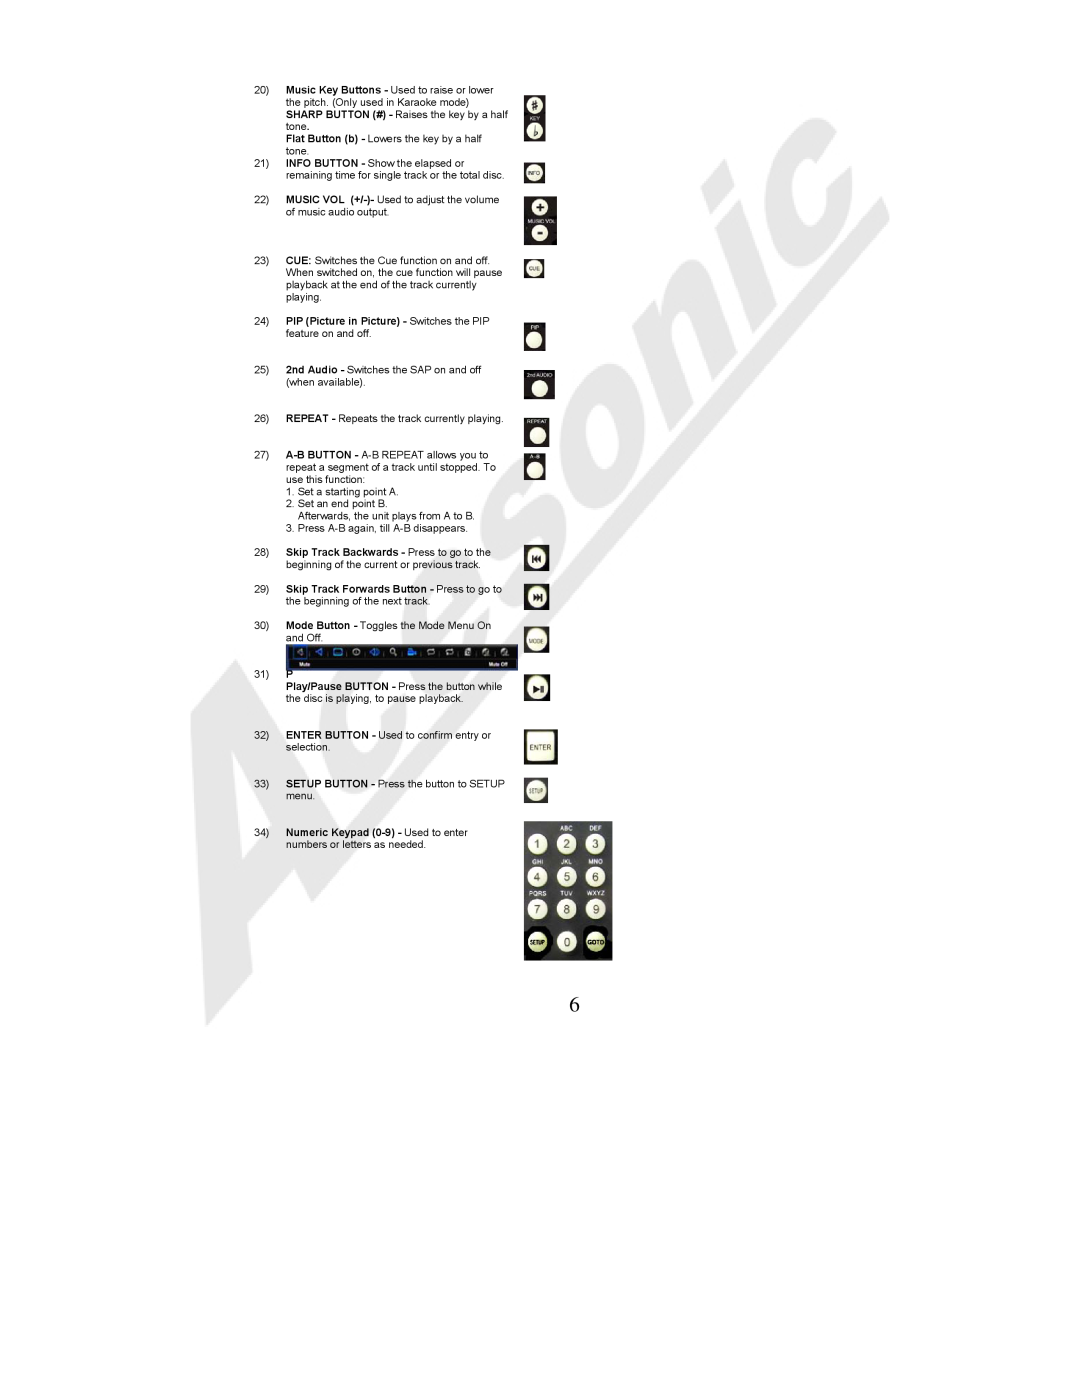 Acesonic BDK-2000 user manual PIP Picture in Picture - Switches the PIP feature on and off, 31 P 